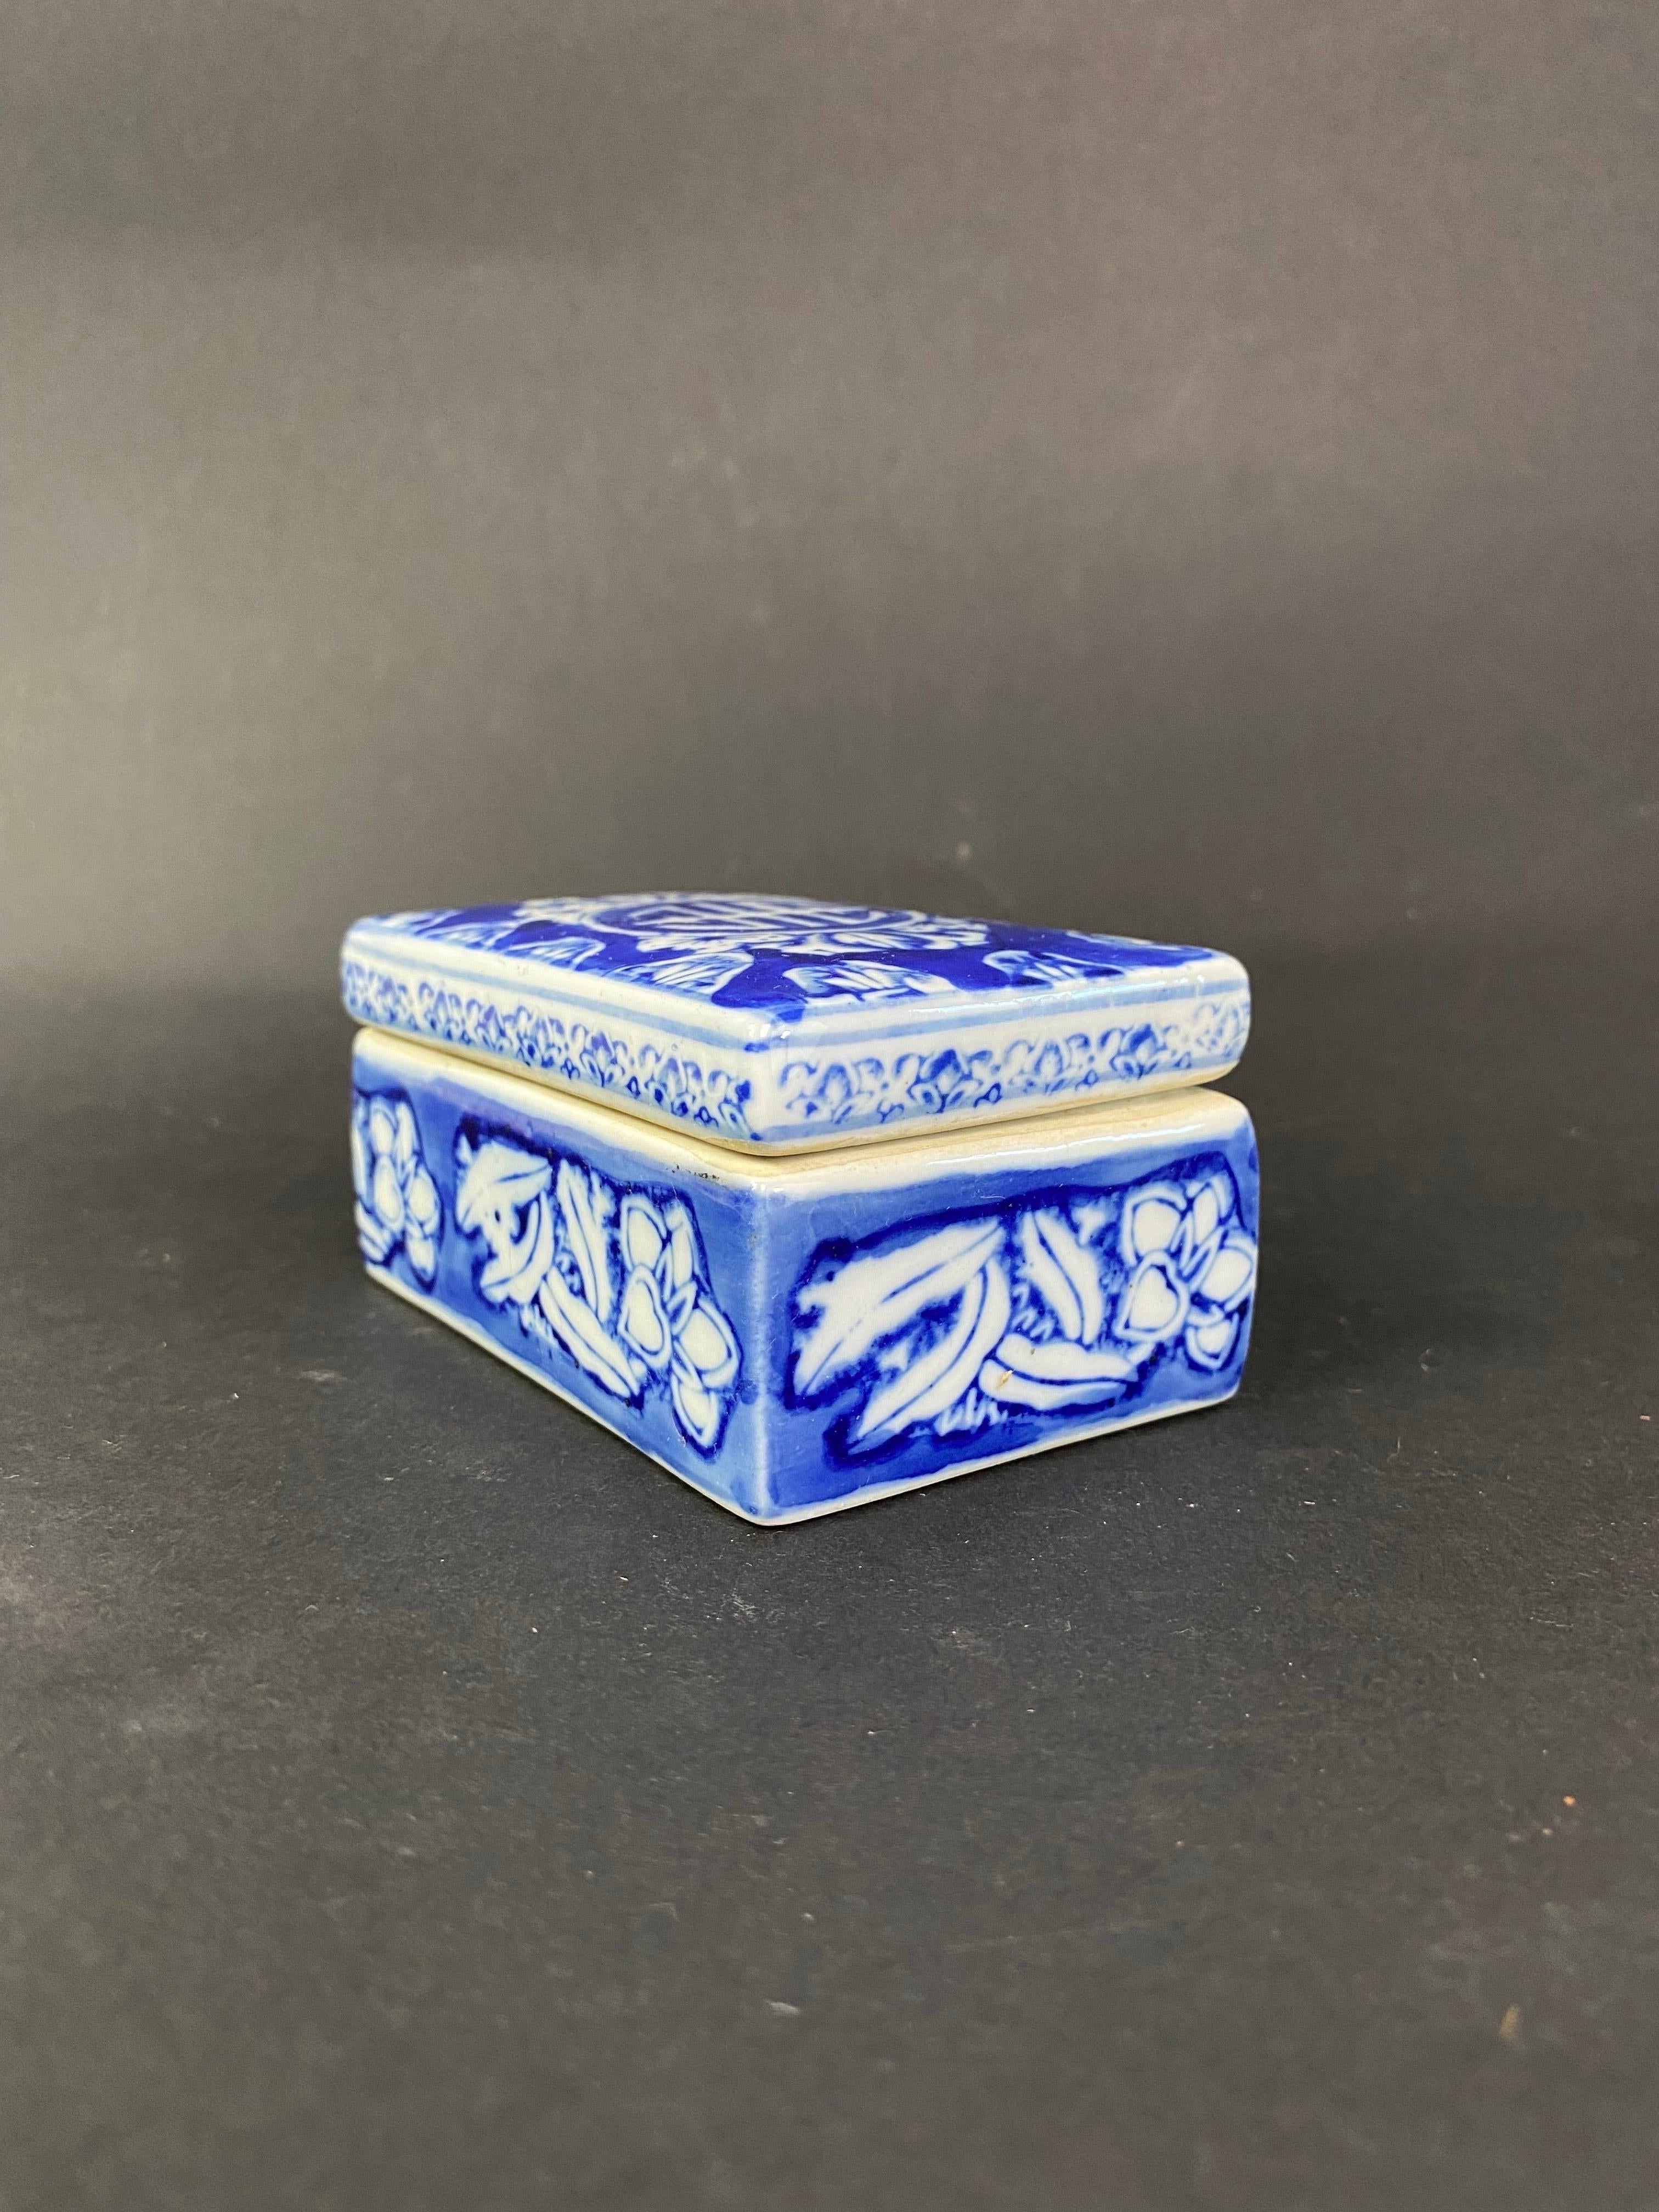 Enameled Blue and White Porcelain Ink Writing Jewerly Box - China 1900 Asian art XXth For Sale